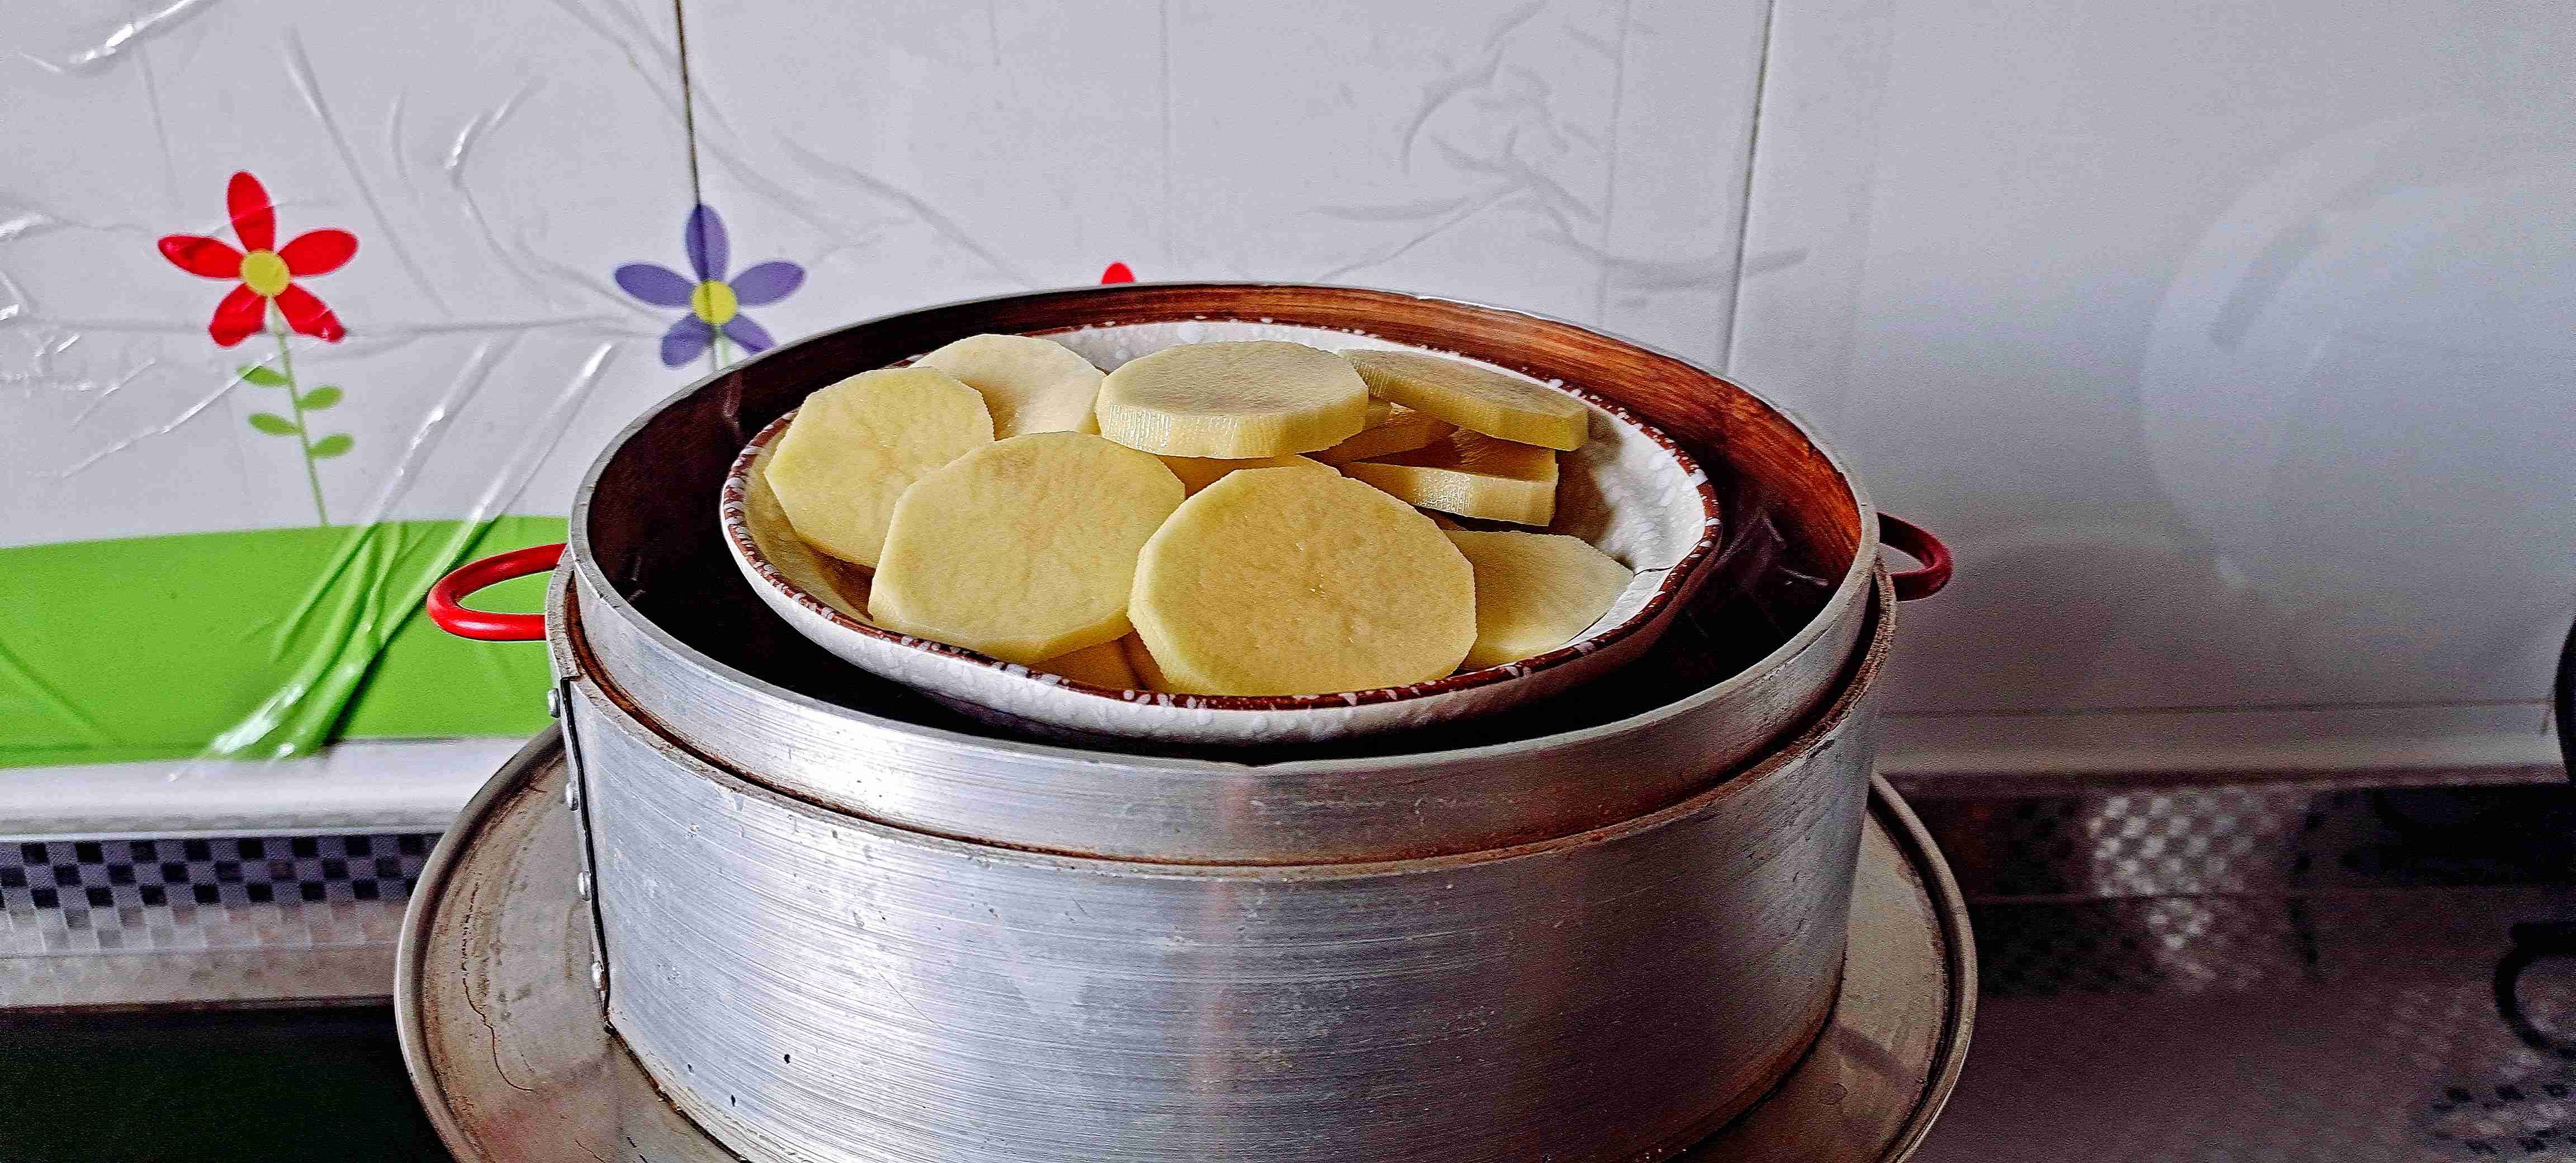 The Method of Tall Potatoes, The Spring Festival Family Banquet is Very Popular... recipe